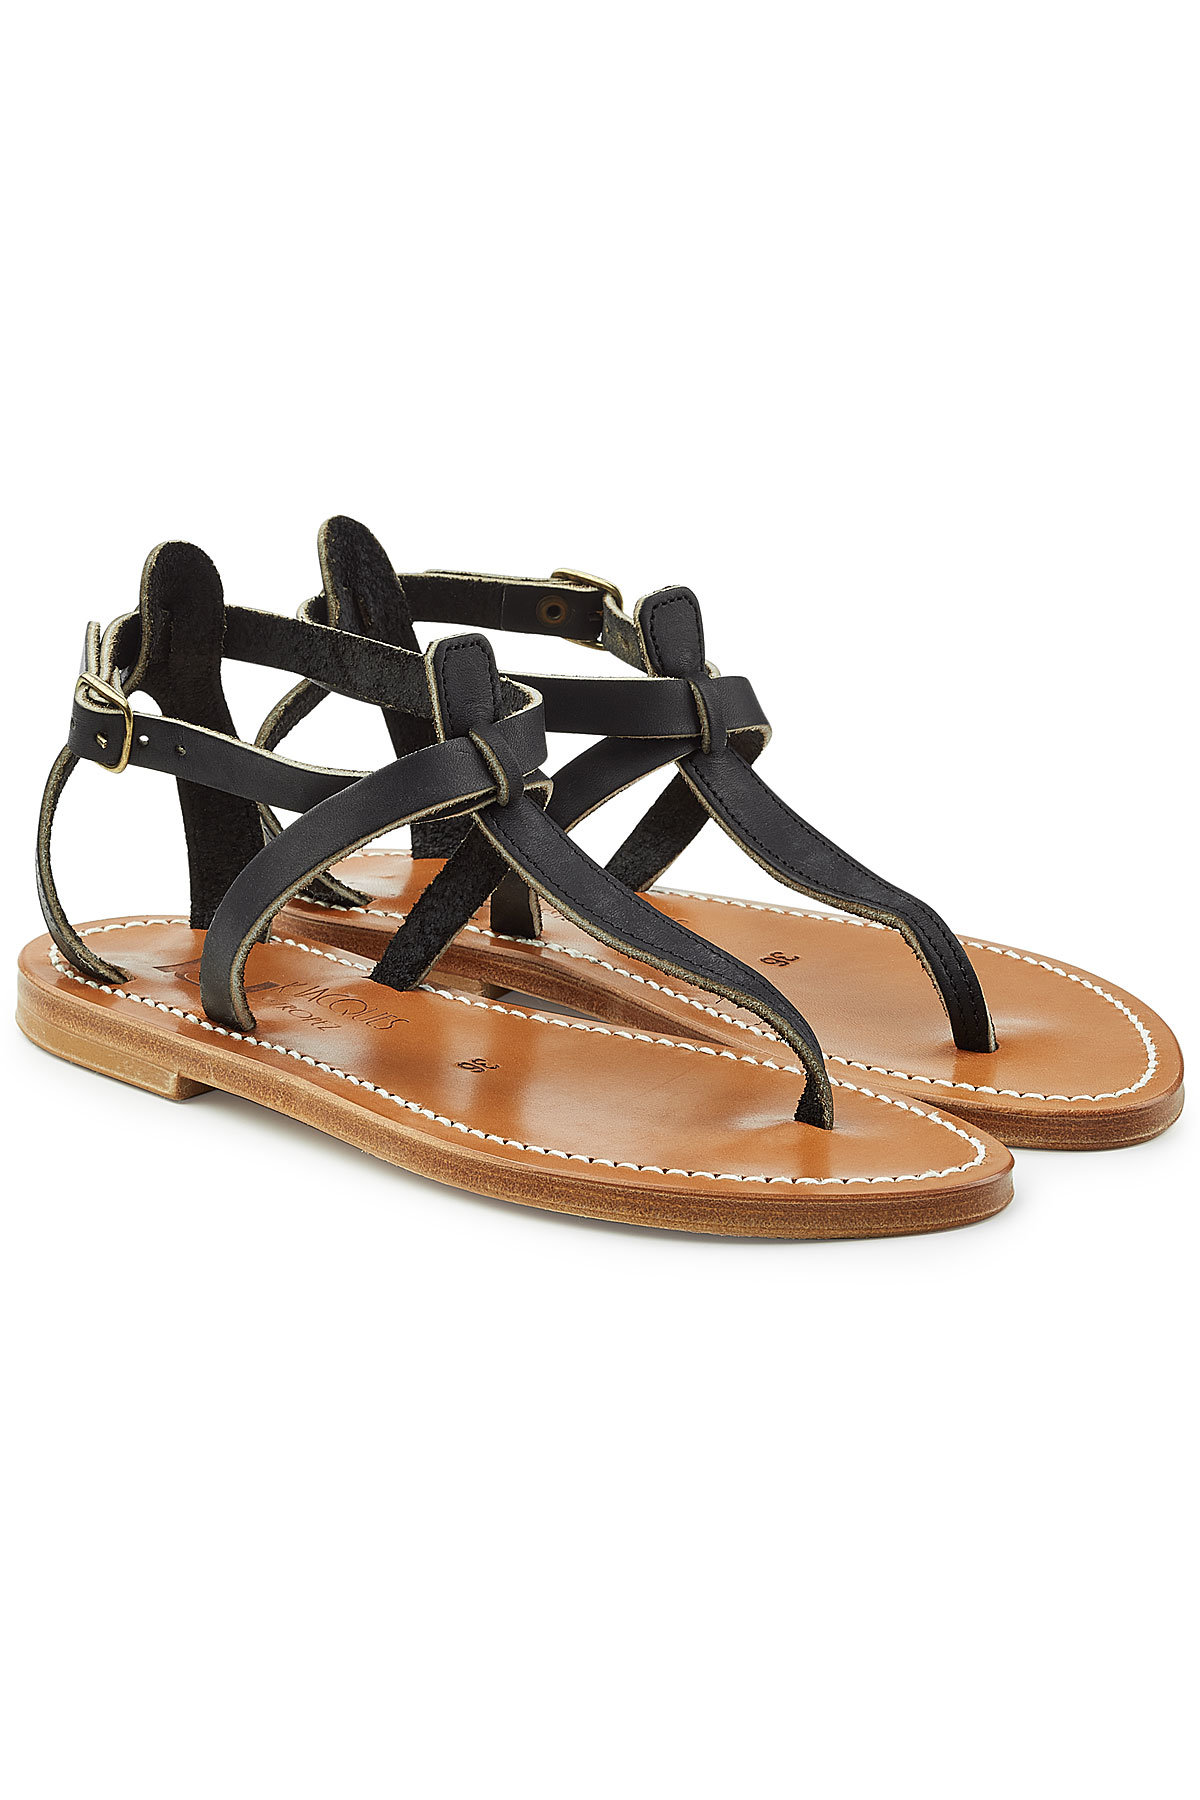 Buffon Leather Sandals by K.Jacques